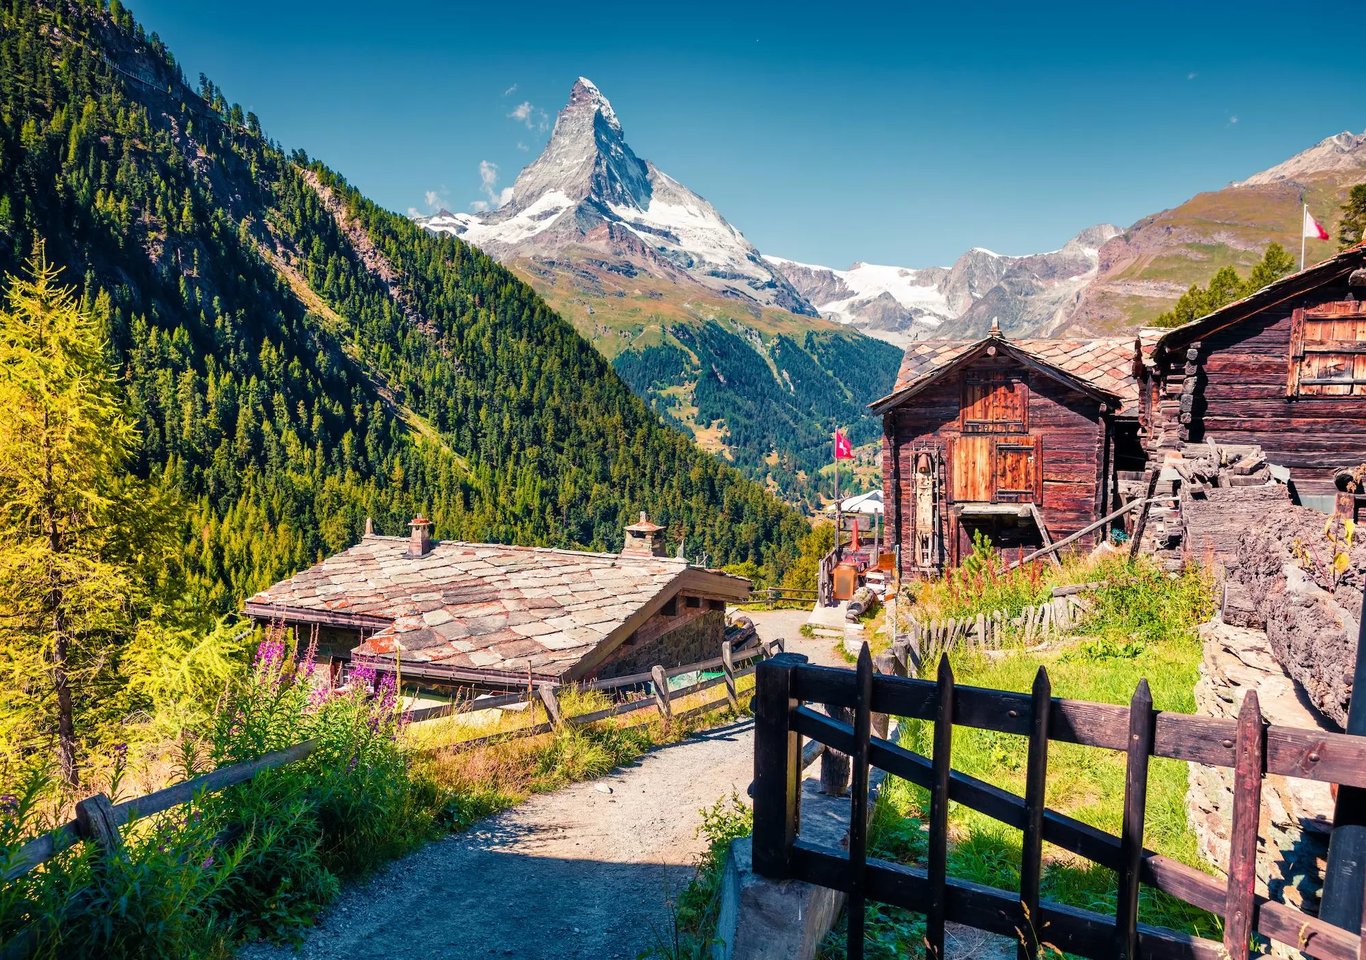 Top 10 attractions in Zermatt with maps and pictures